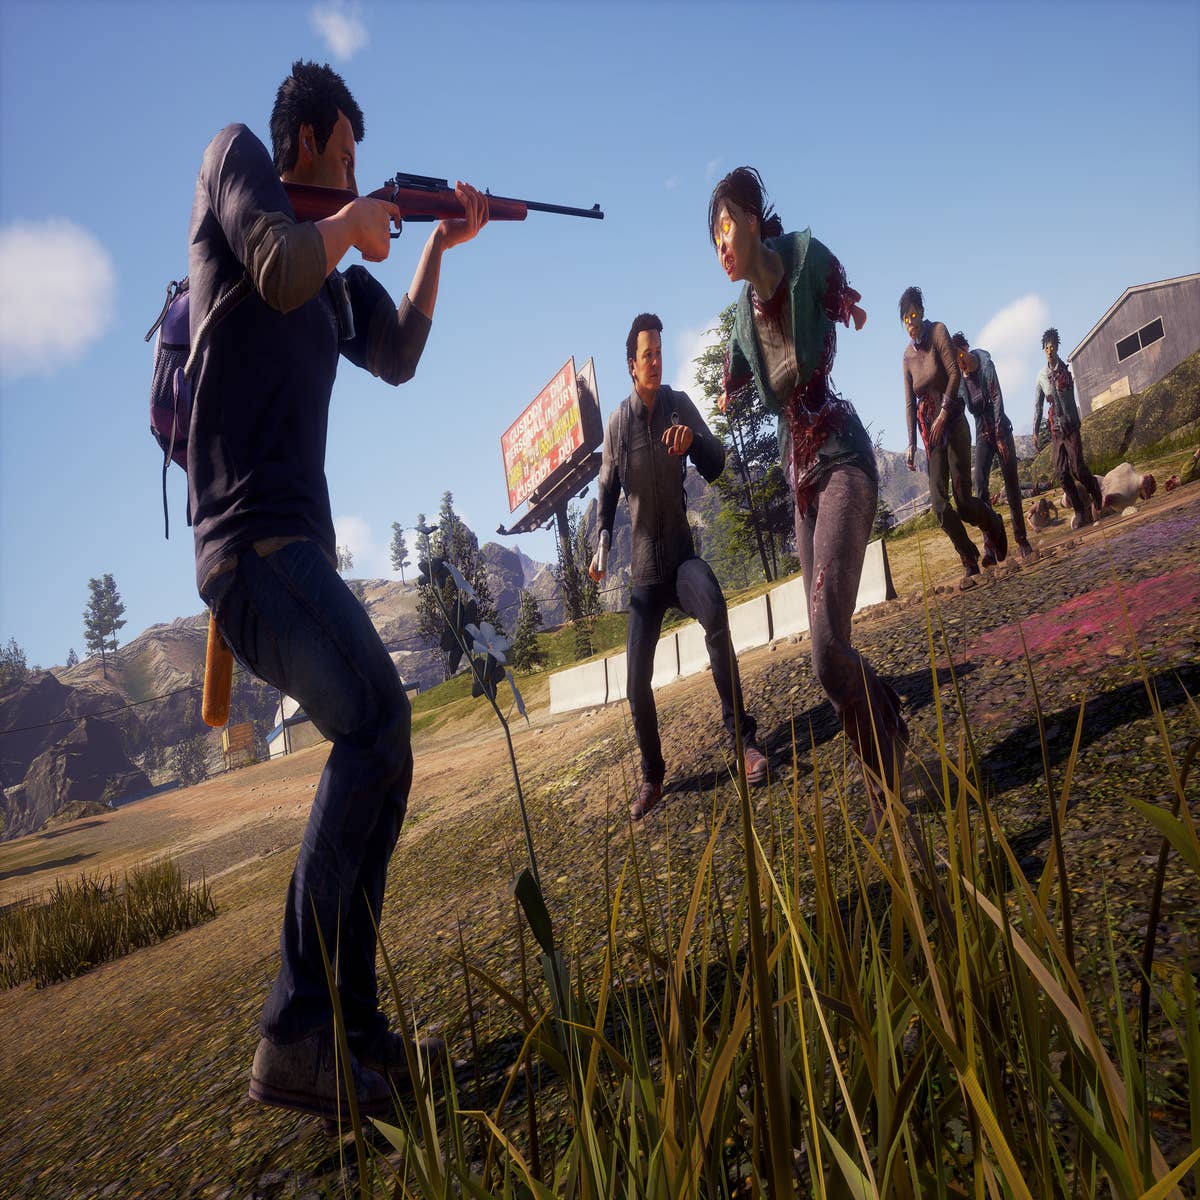 State Of Decay 2 Update 25: Plague Territories Goes Live On June